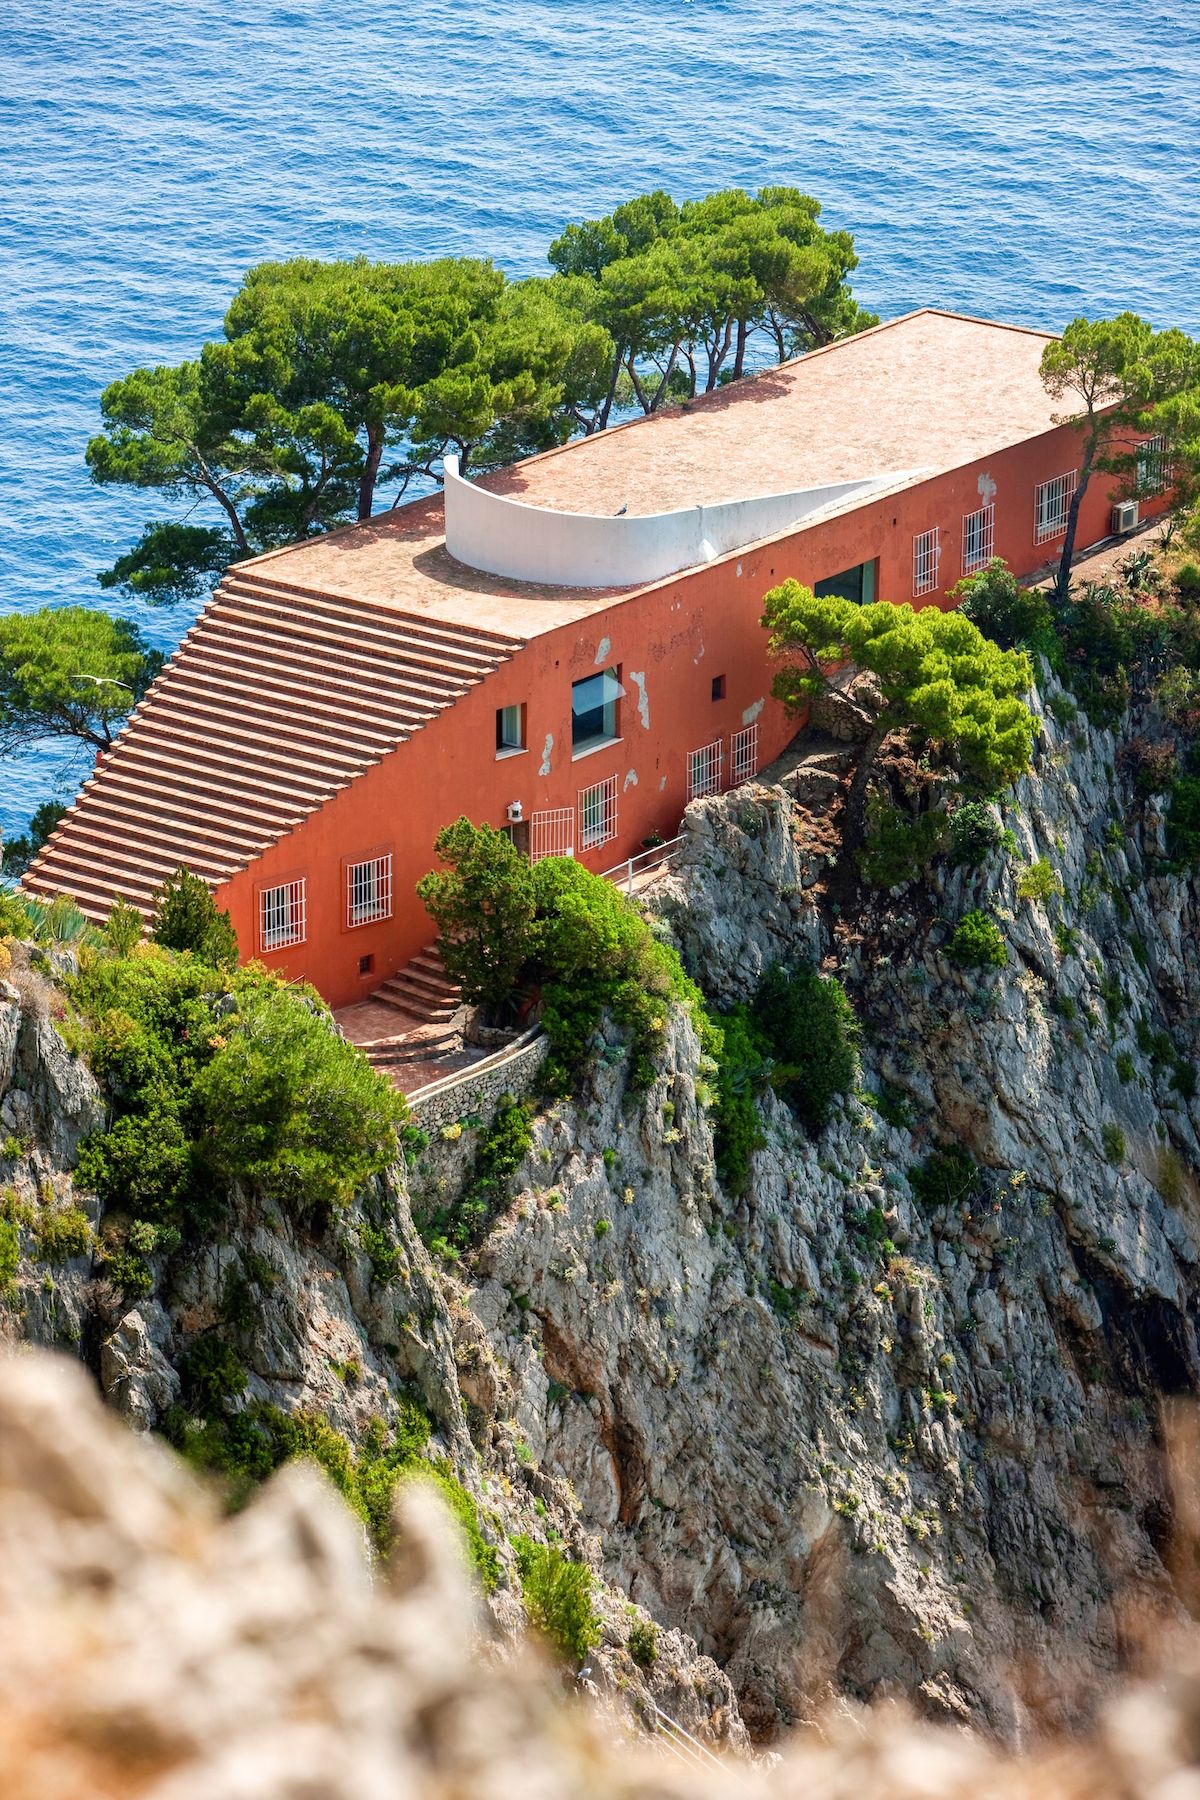 casa malaparte also villa malaparte is a house on punta massullo is an examples of italian modern architecture designed by curzio malaparte on the eastern side of the isle of capri island campania italy europe photo by carlo borlenghiredacouniversal images group via getty images